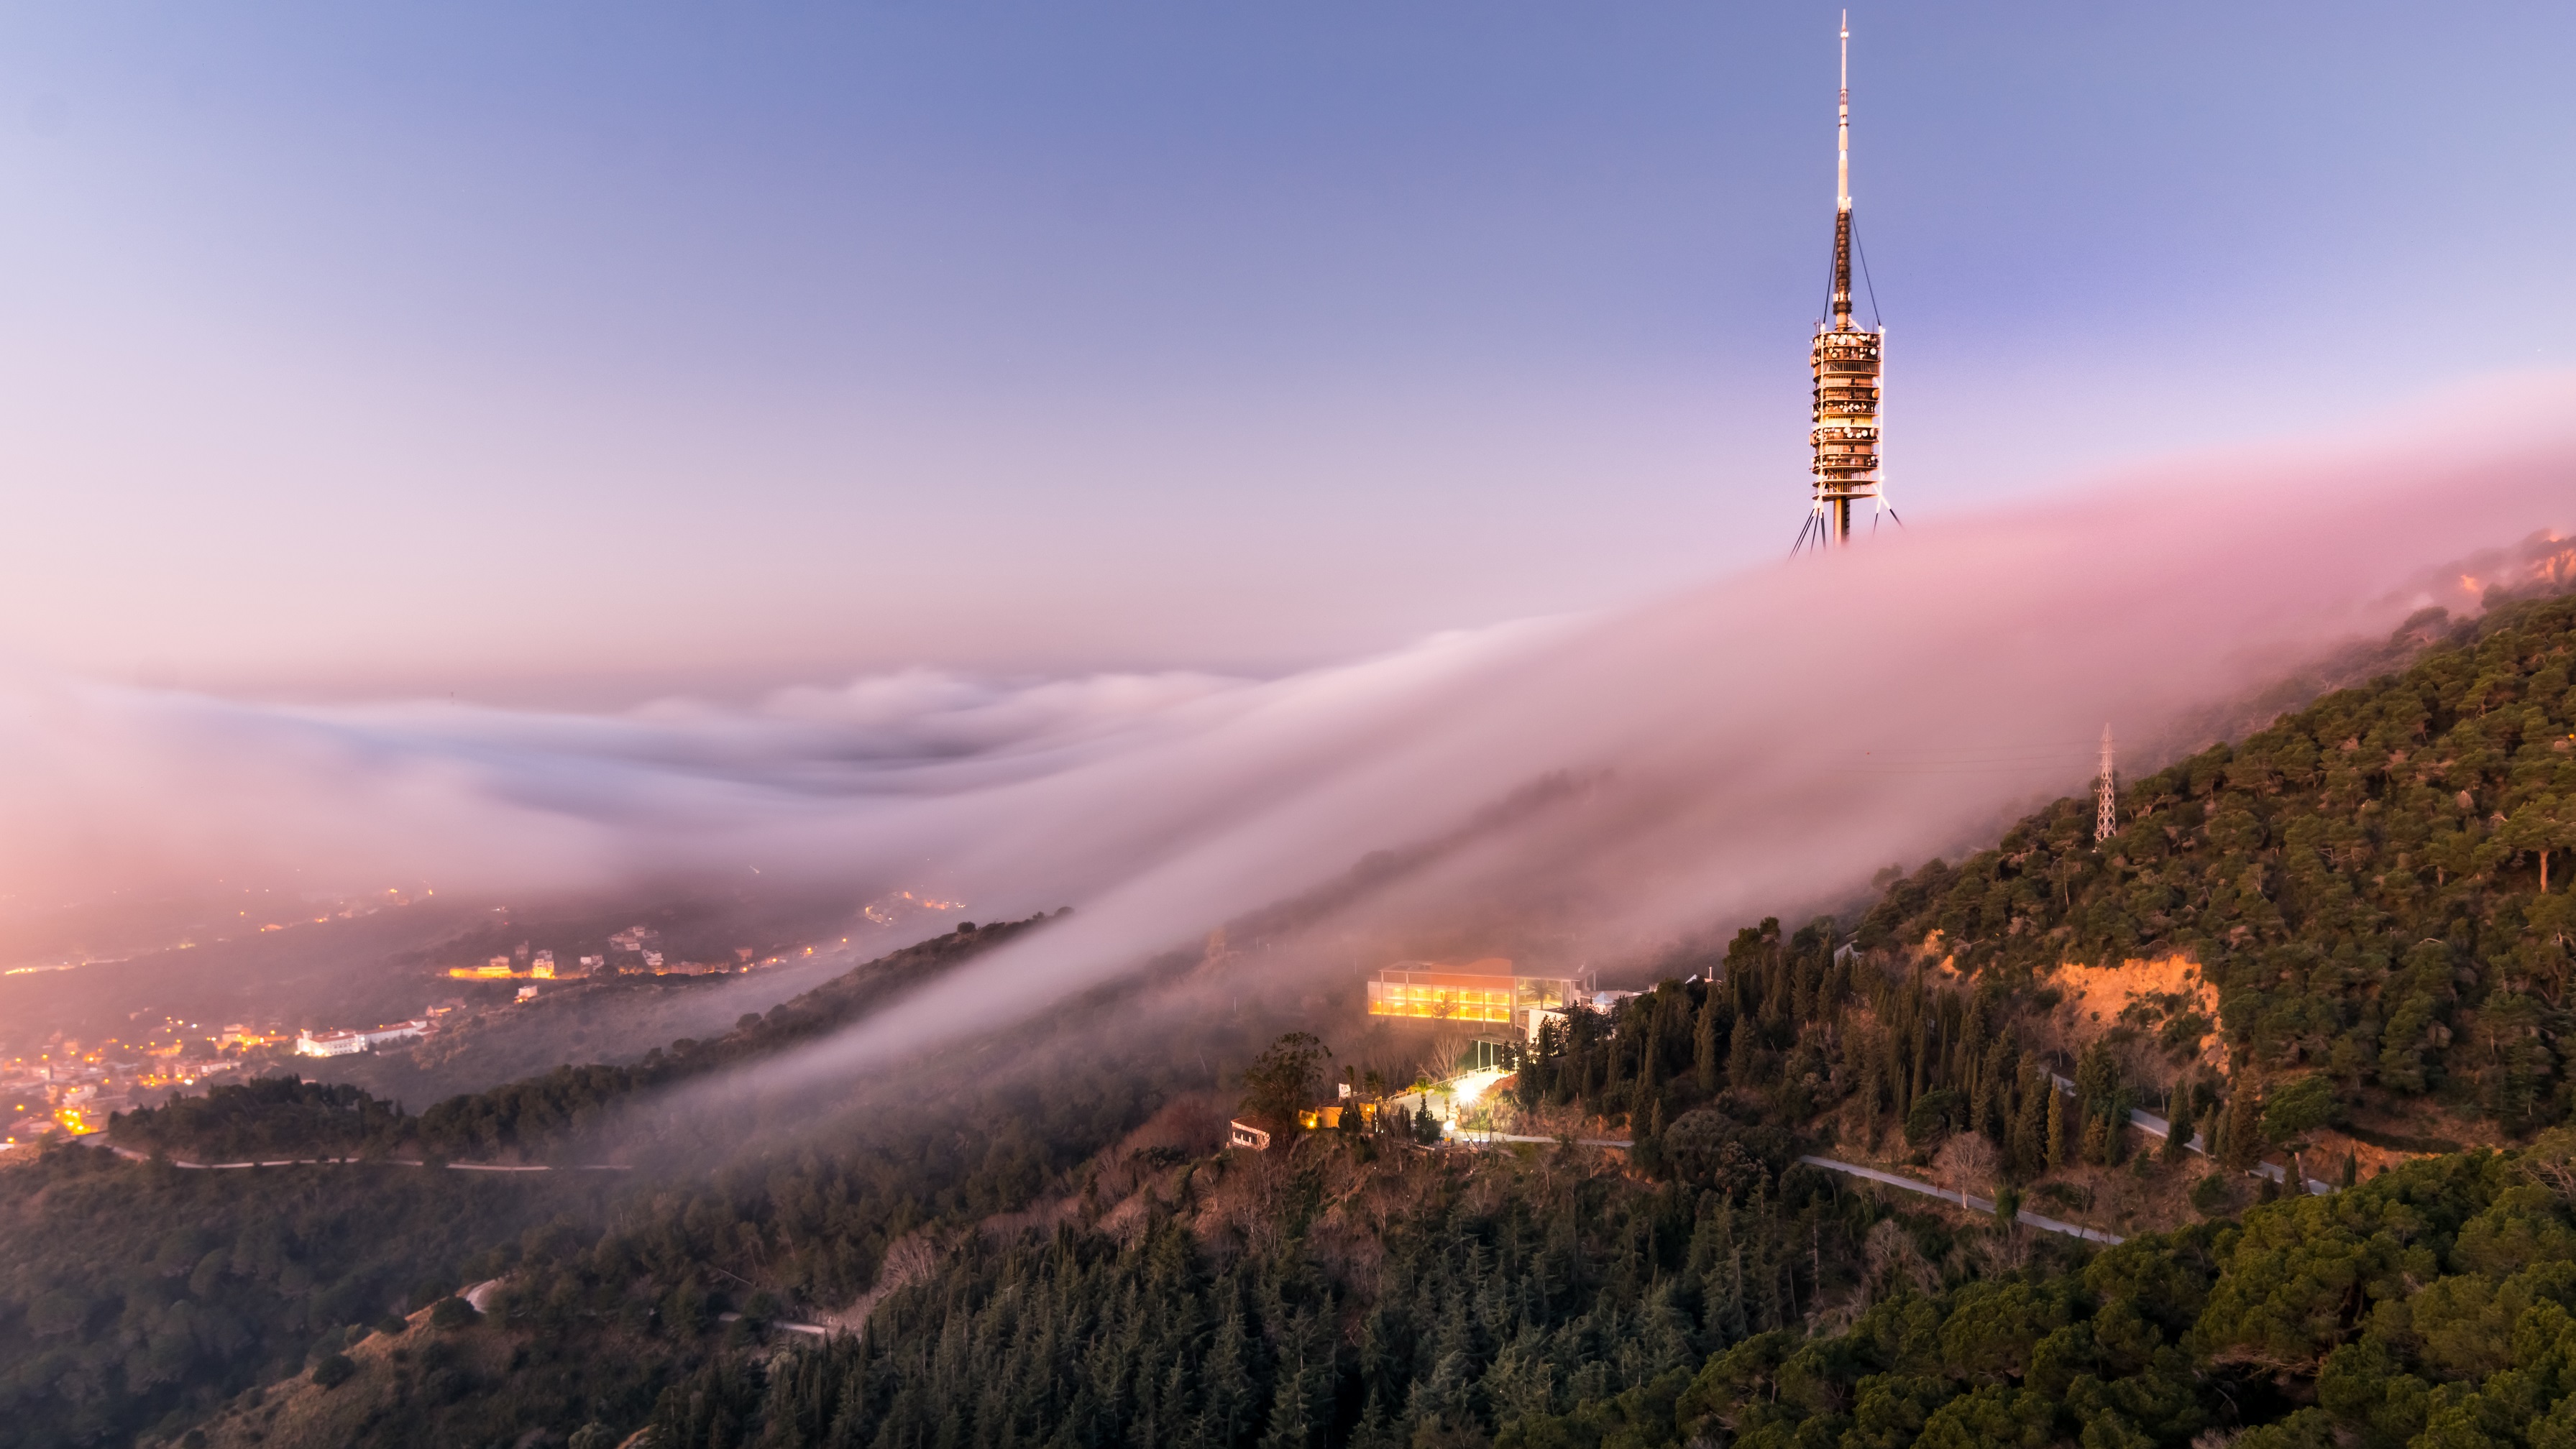 1st Place Awesome cloudfalls in Barcelona from Fabra Observatory by Alfons Puertas @alfons_pc